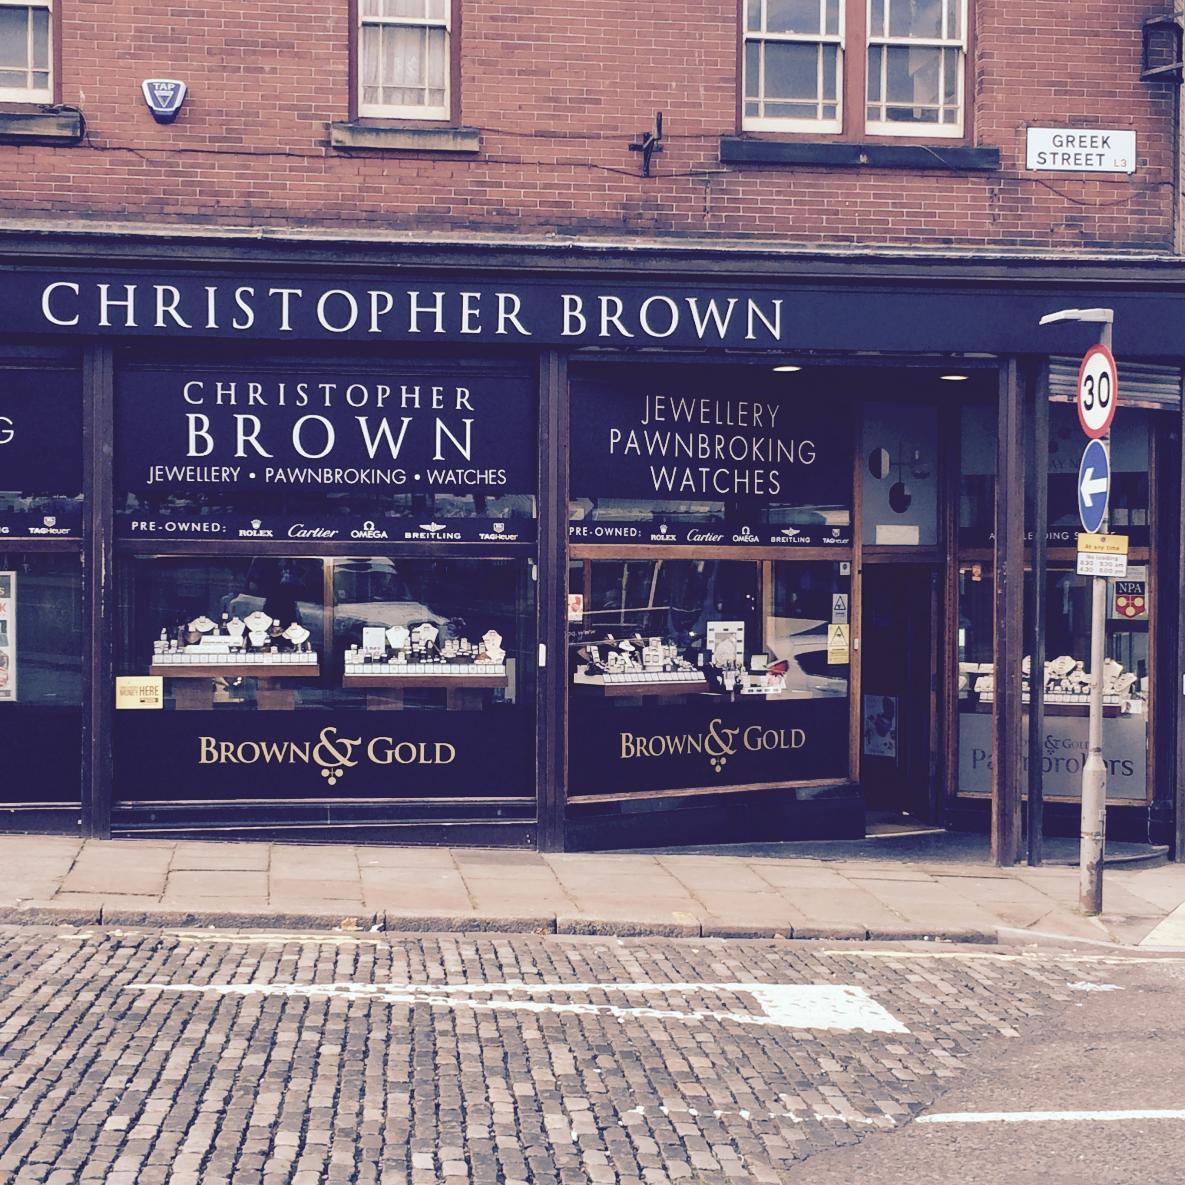 Jewellers and Pawnbrokers